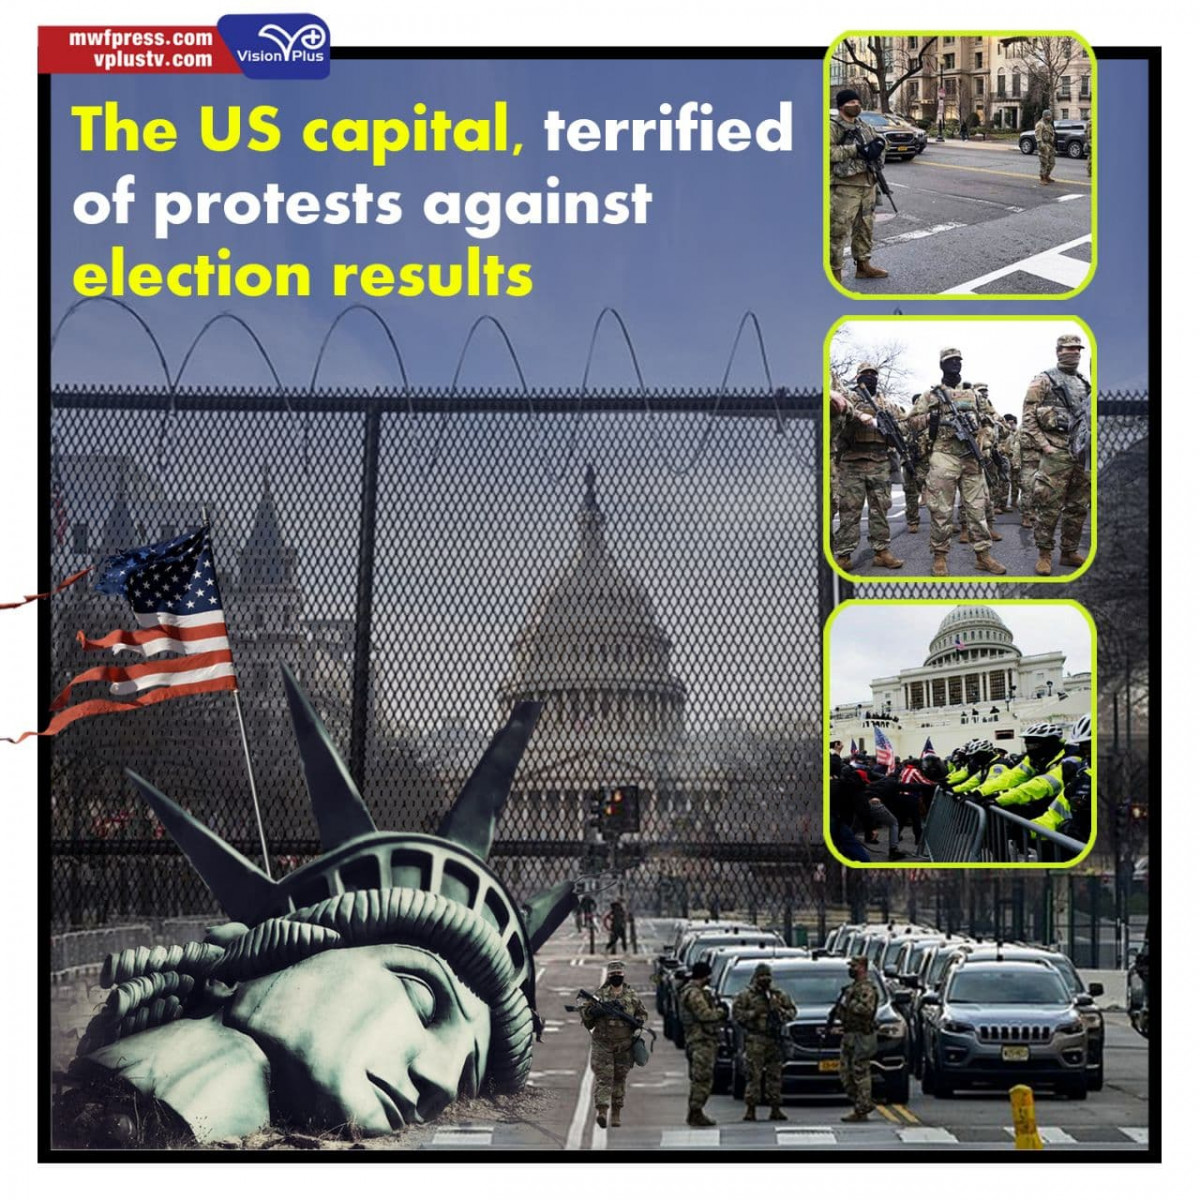 The US capital, terrified of protests against election results